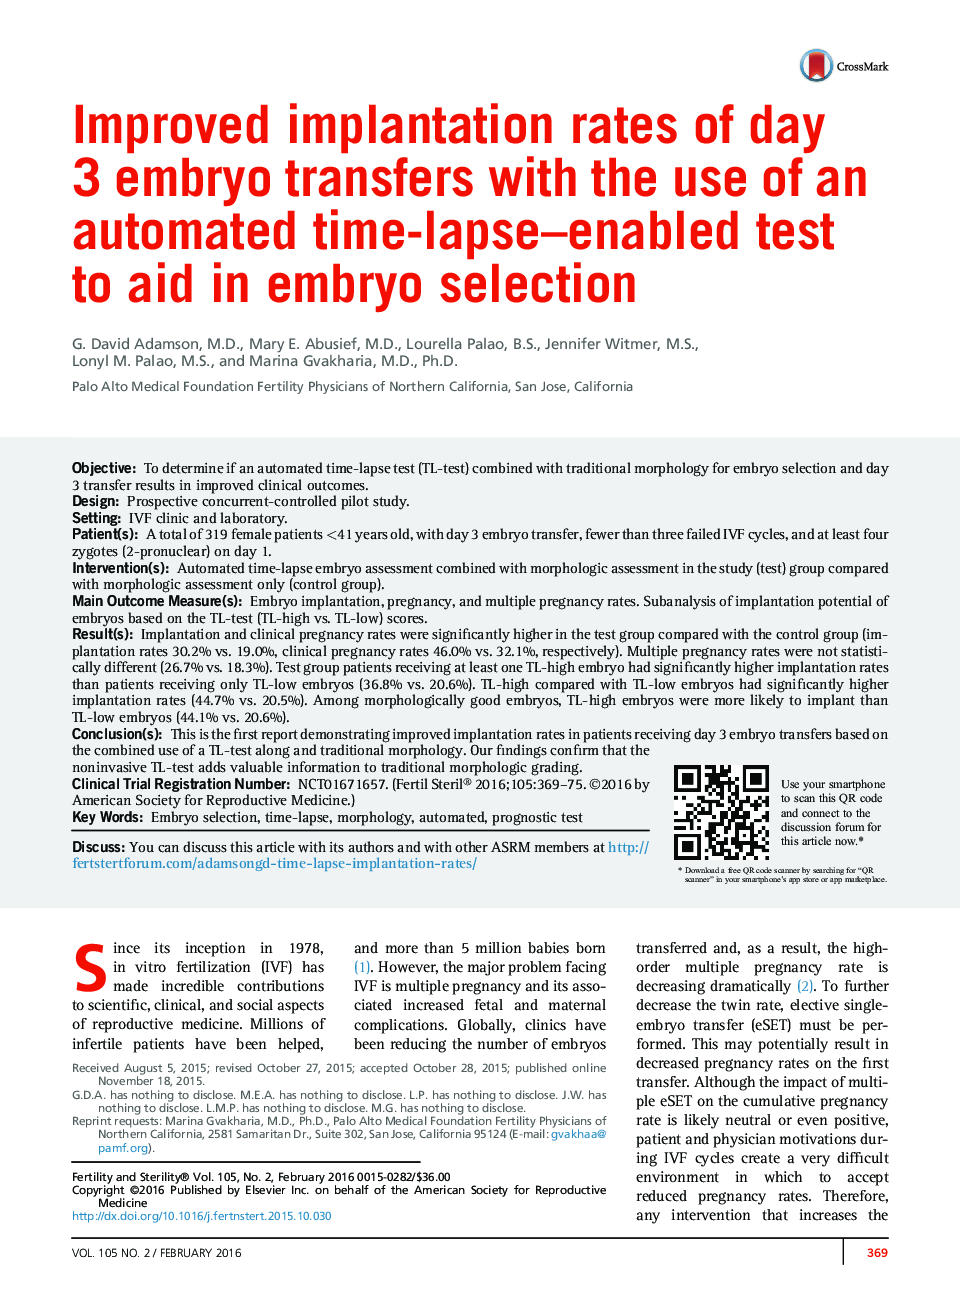 Improved implantation rates of day 3 embryo transfers with the use of an automated time-lapse-enabled test to aid in embryo selection